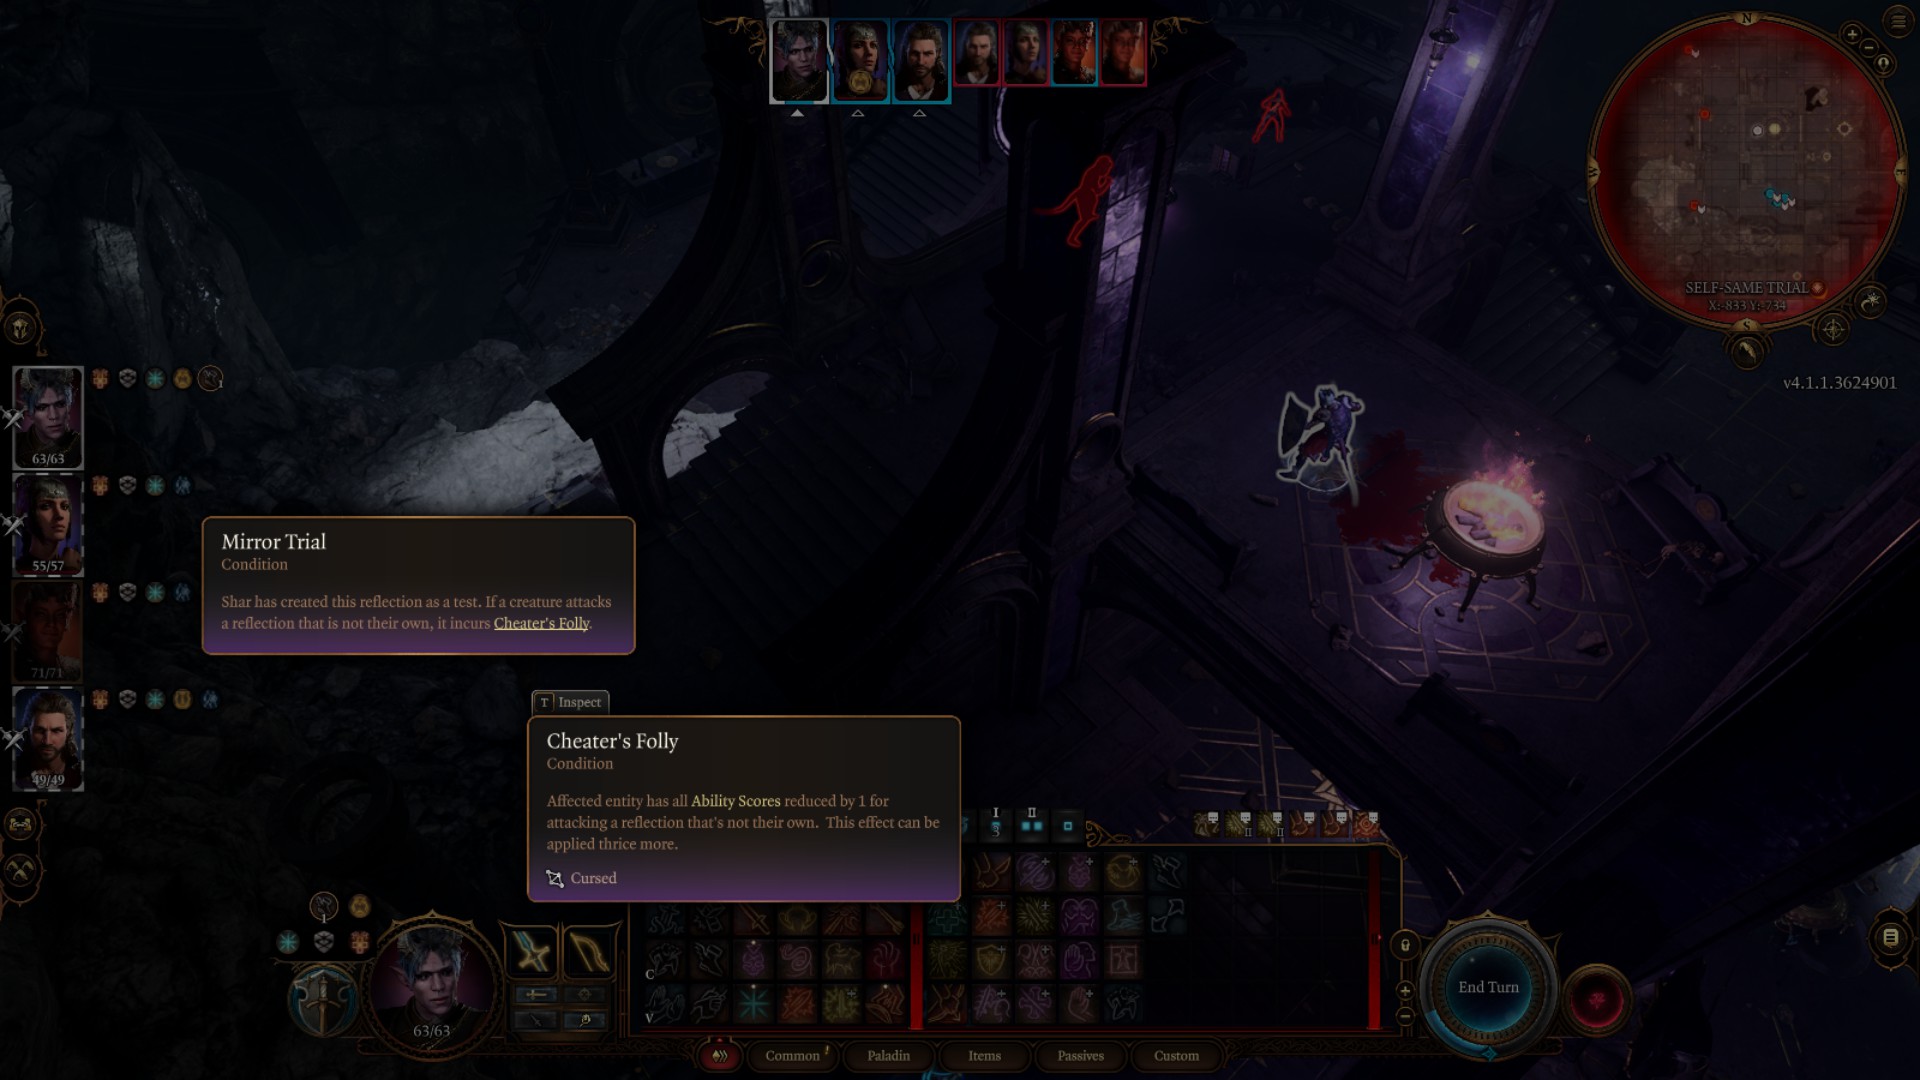 An image displaying the debuff from the a trial in the Gauntlet of Shar from Baldur's Gate 3.